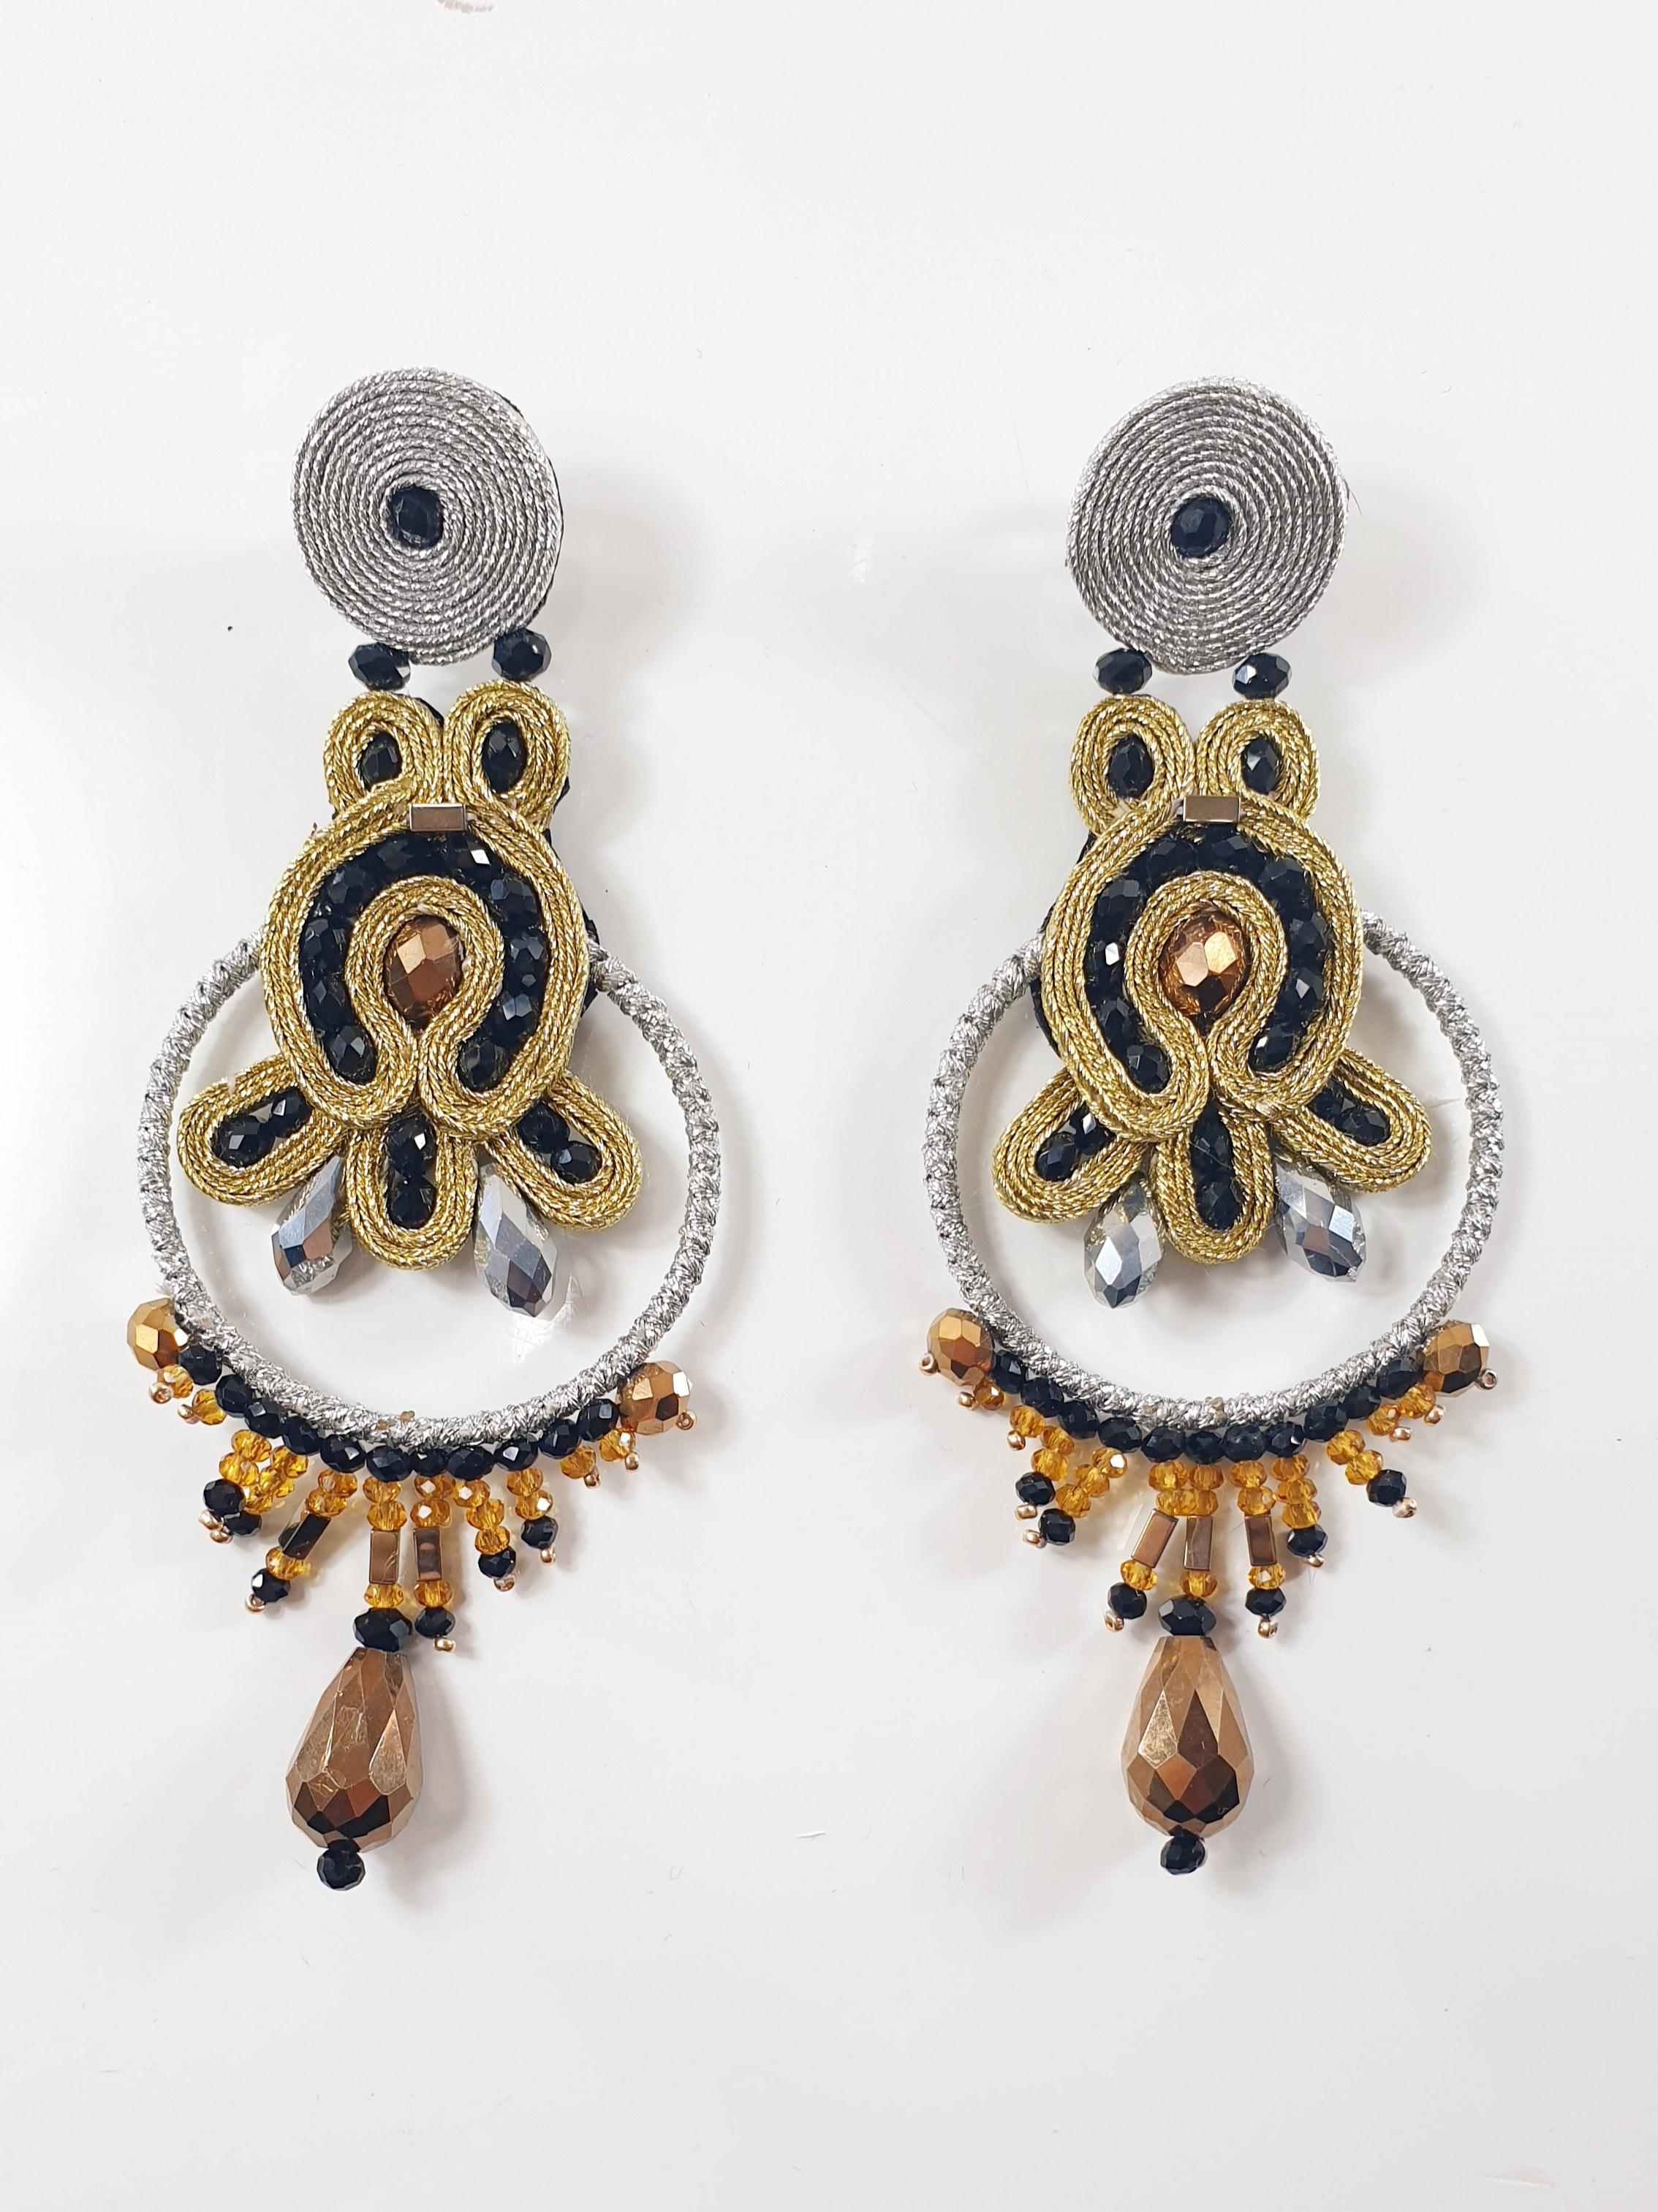 Musula Urban Silver Opera Earrings
Urban Collection is a special homage to sweet lovers.
Soutache earrings made with rayon 2mm, hematites and crystal beads. 
Silver clips lenght 10cm 3.94inches. 
Back finish in natural smooth and thin